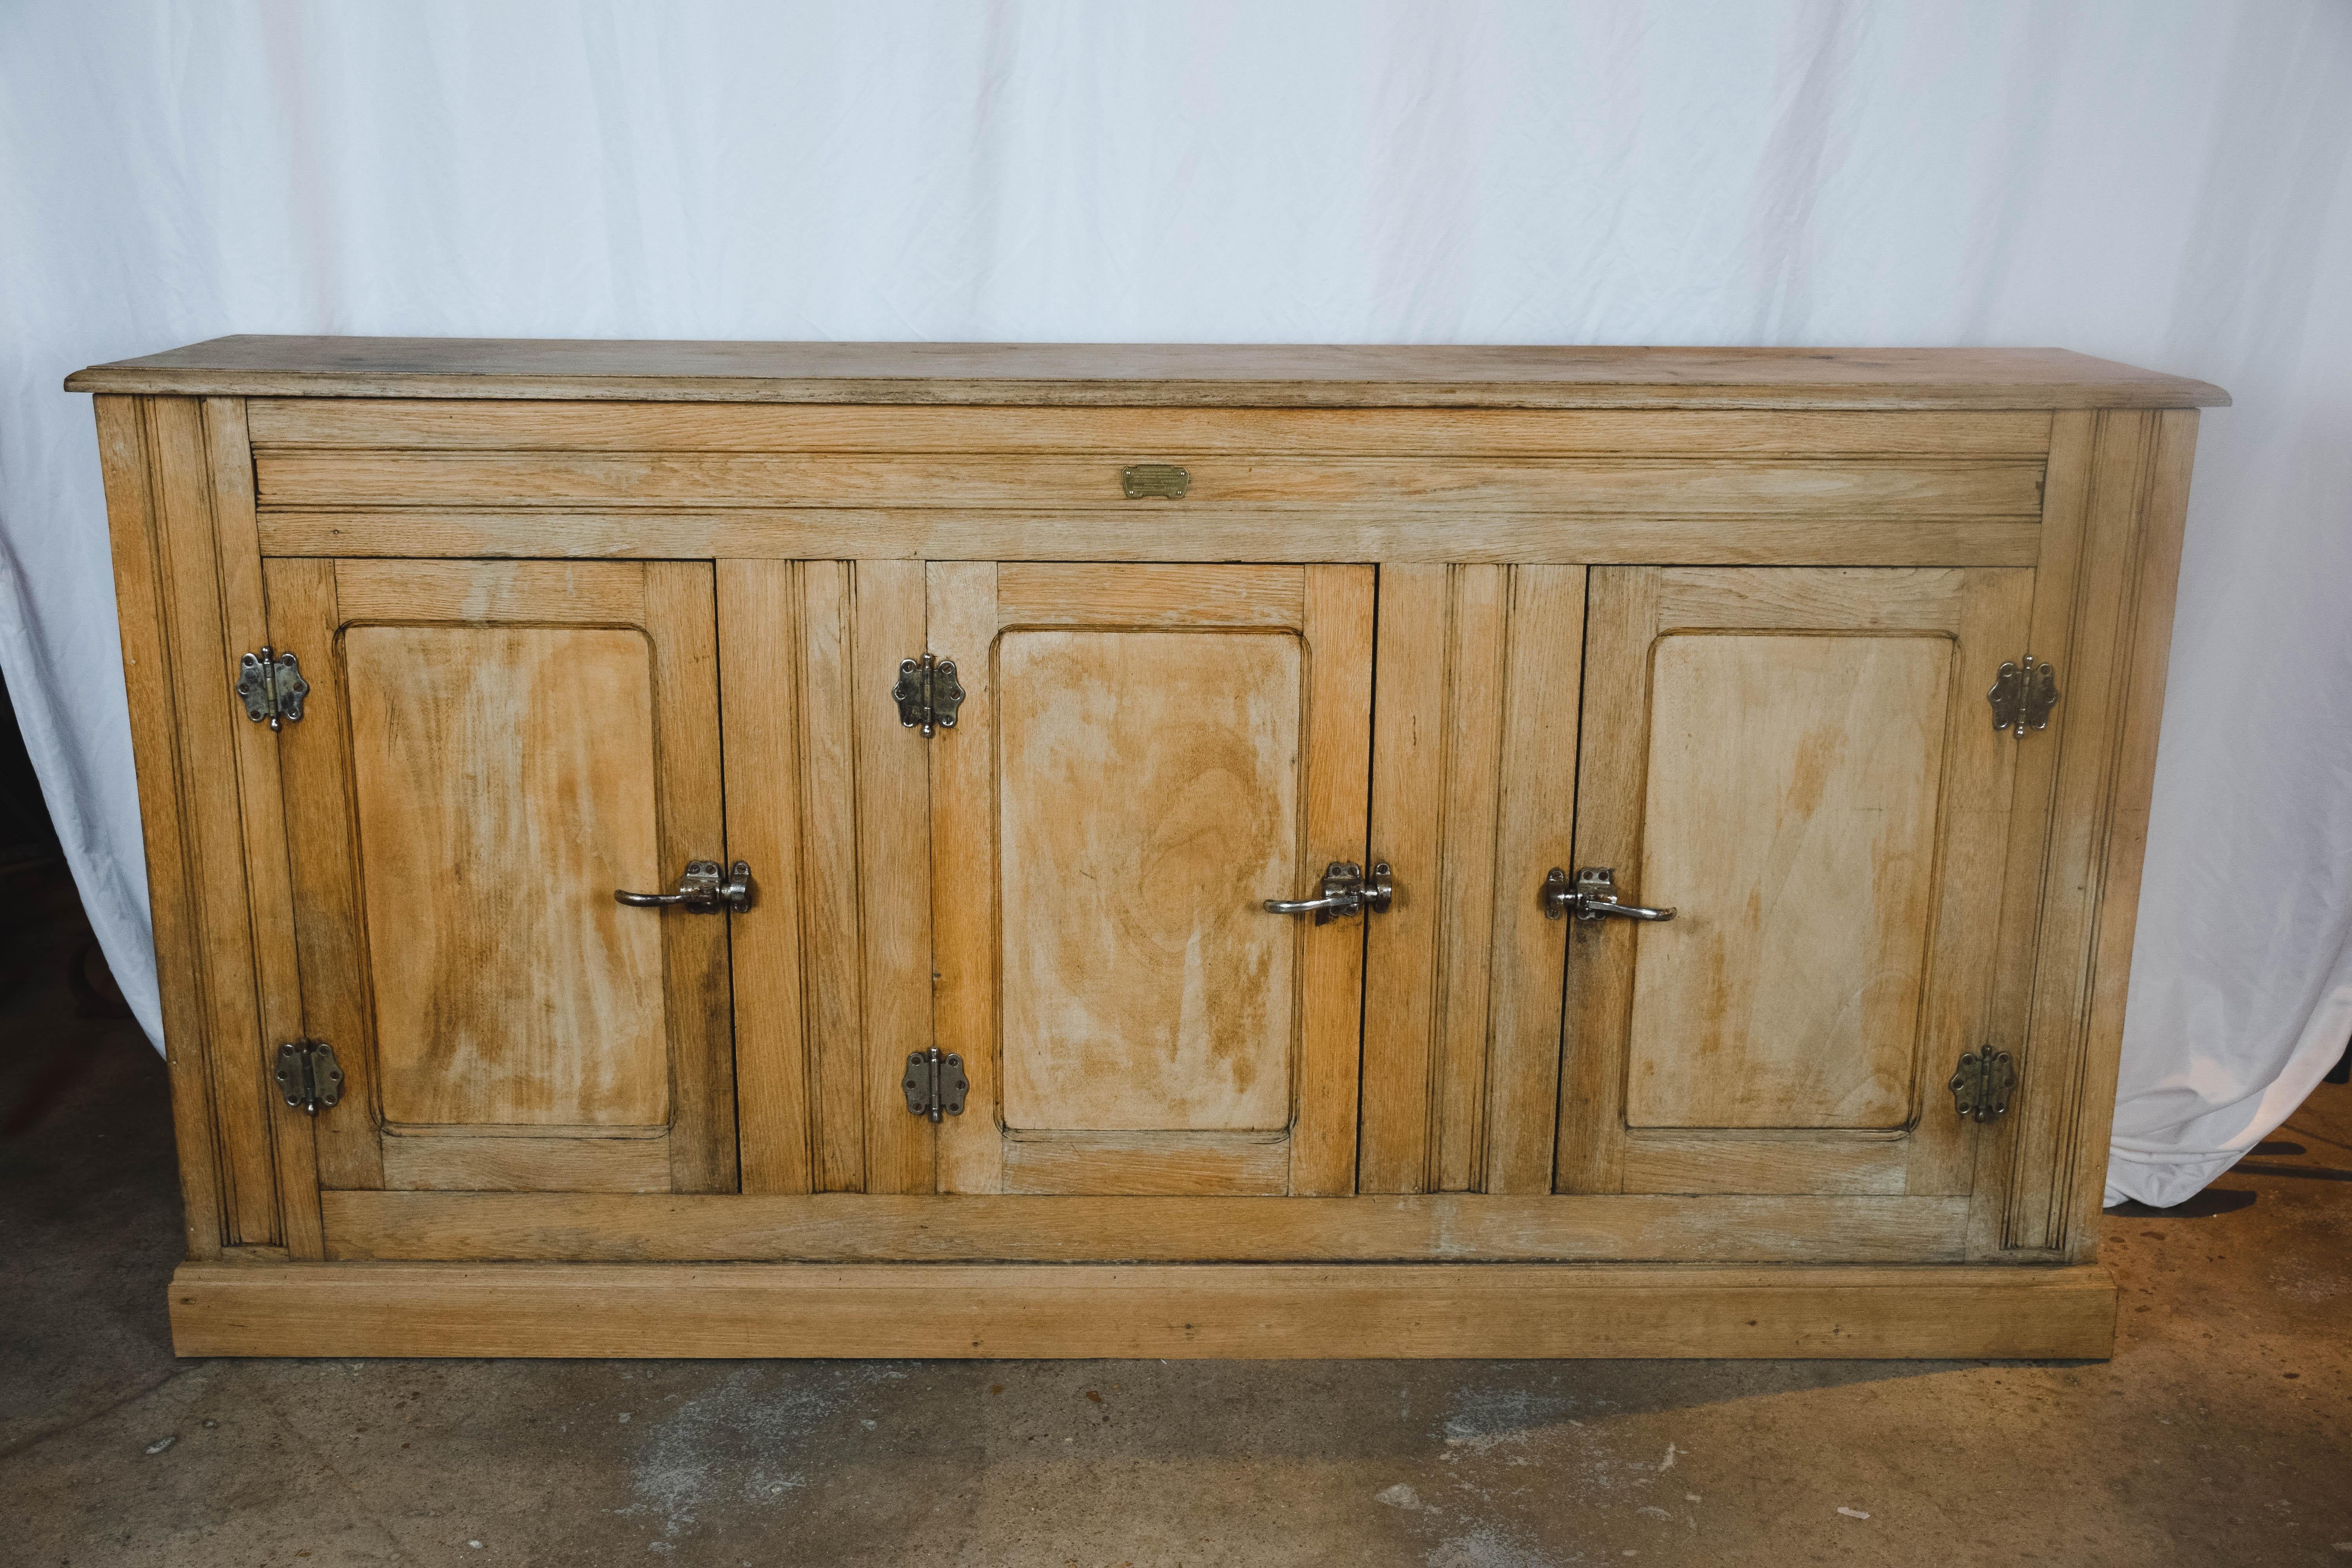 Found in France, this rustic industrial ice box cabinet in pine has original hardware, removable slatted shelves and a zinc bottom that was used to hold ice. A predecessor to the modern day refrigerator, this cabinet has a brass plate that reads